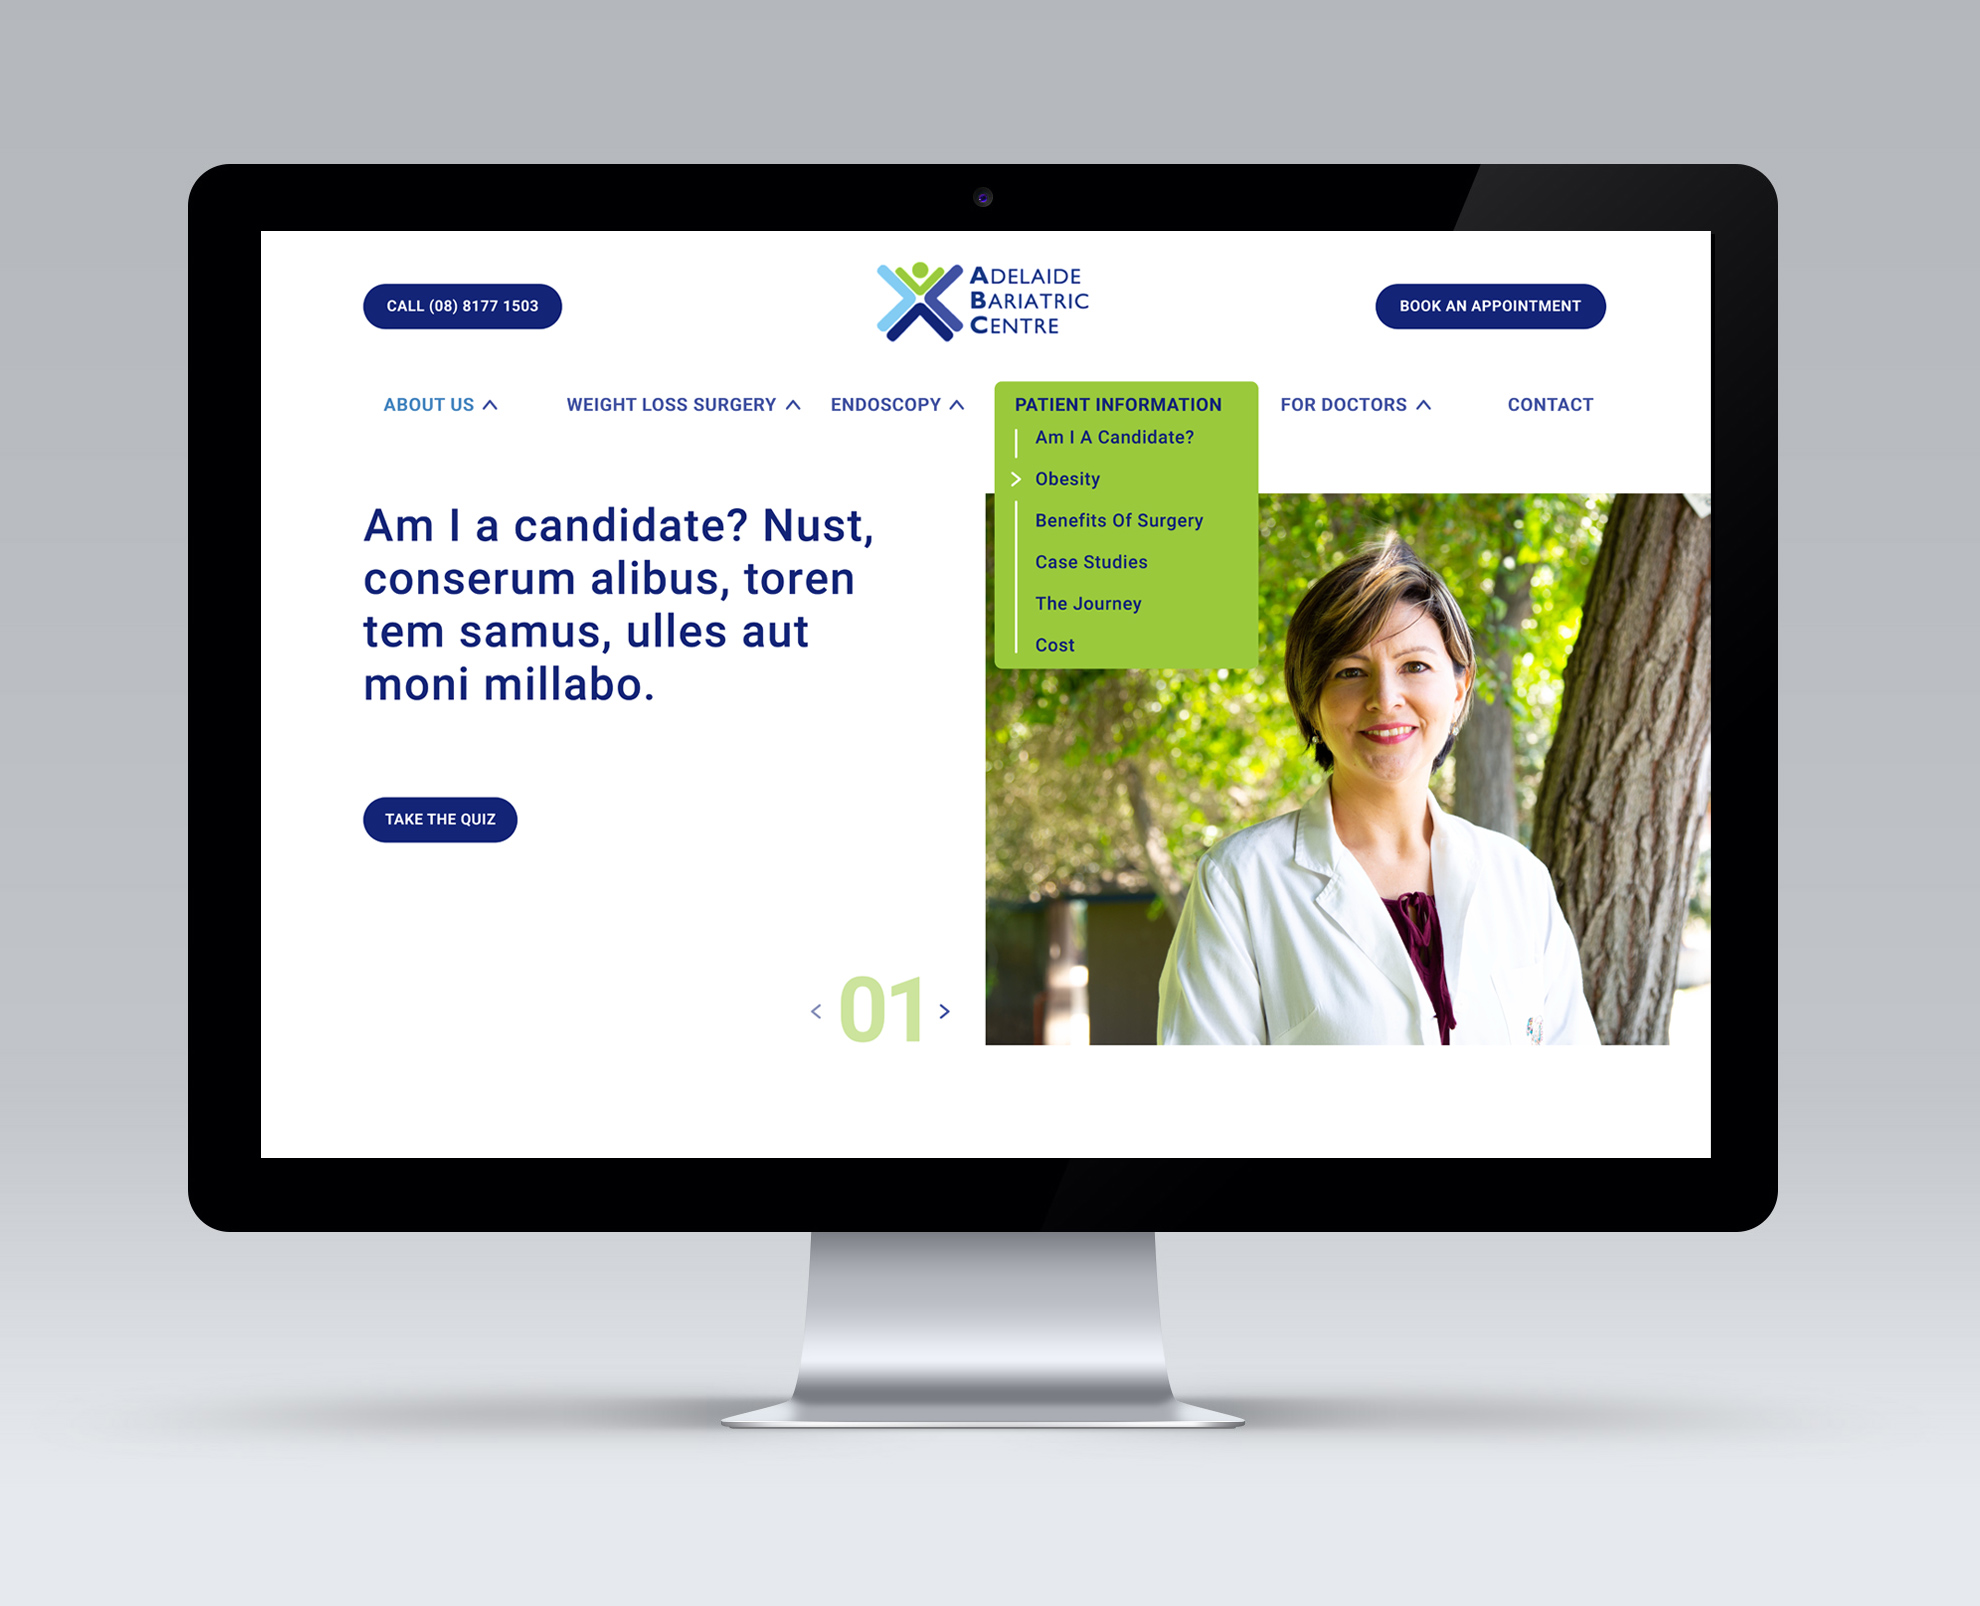 Adelaide Bariatric Centre website redesign, website wireframe and high fidelity prototype.